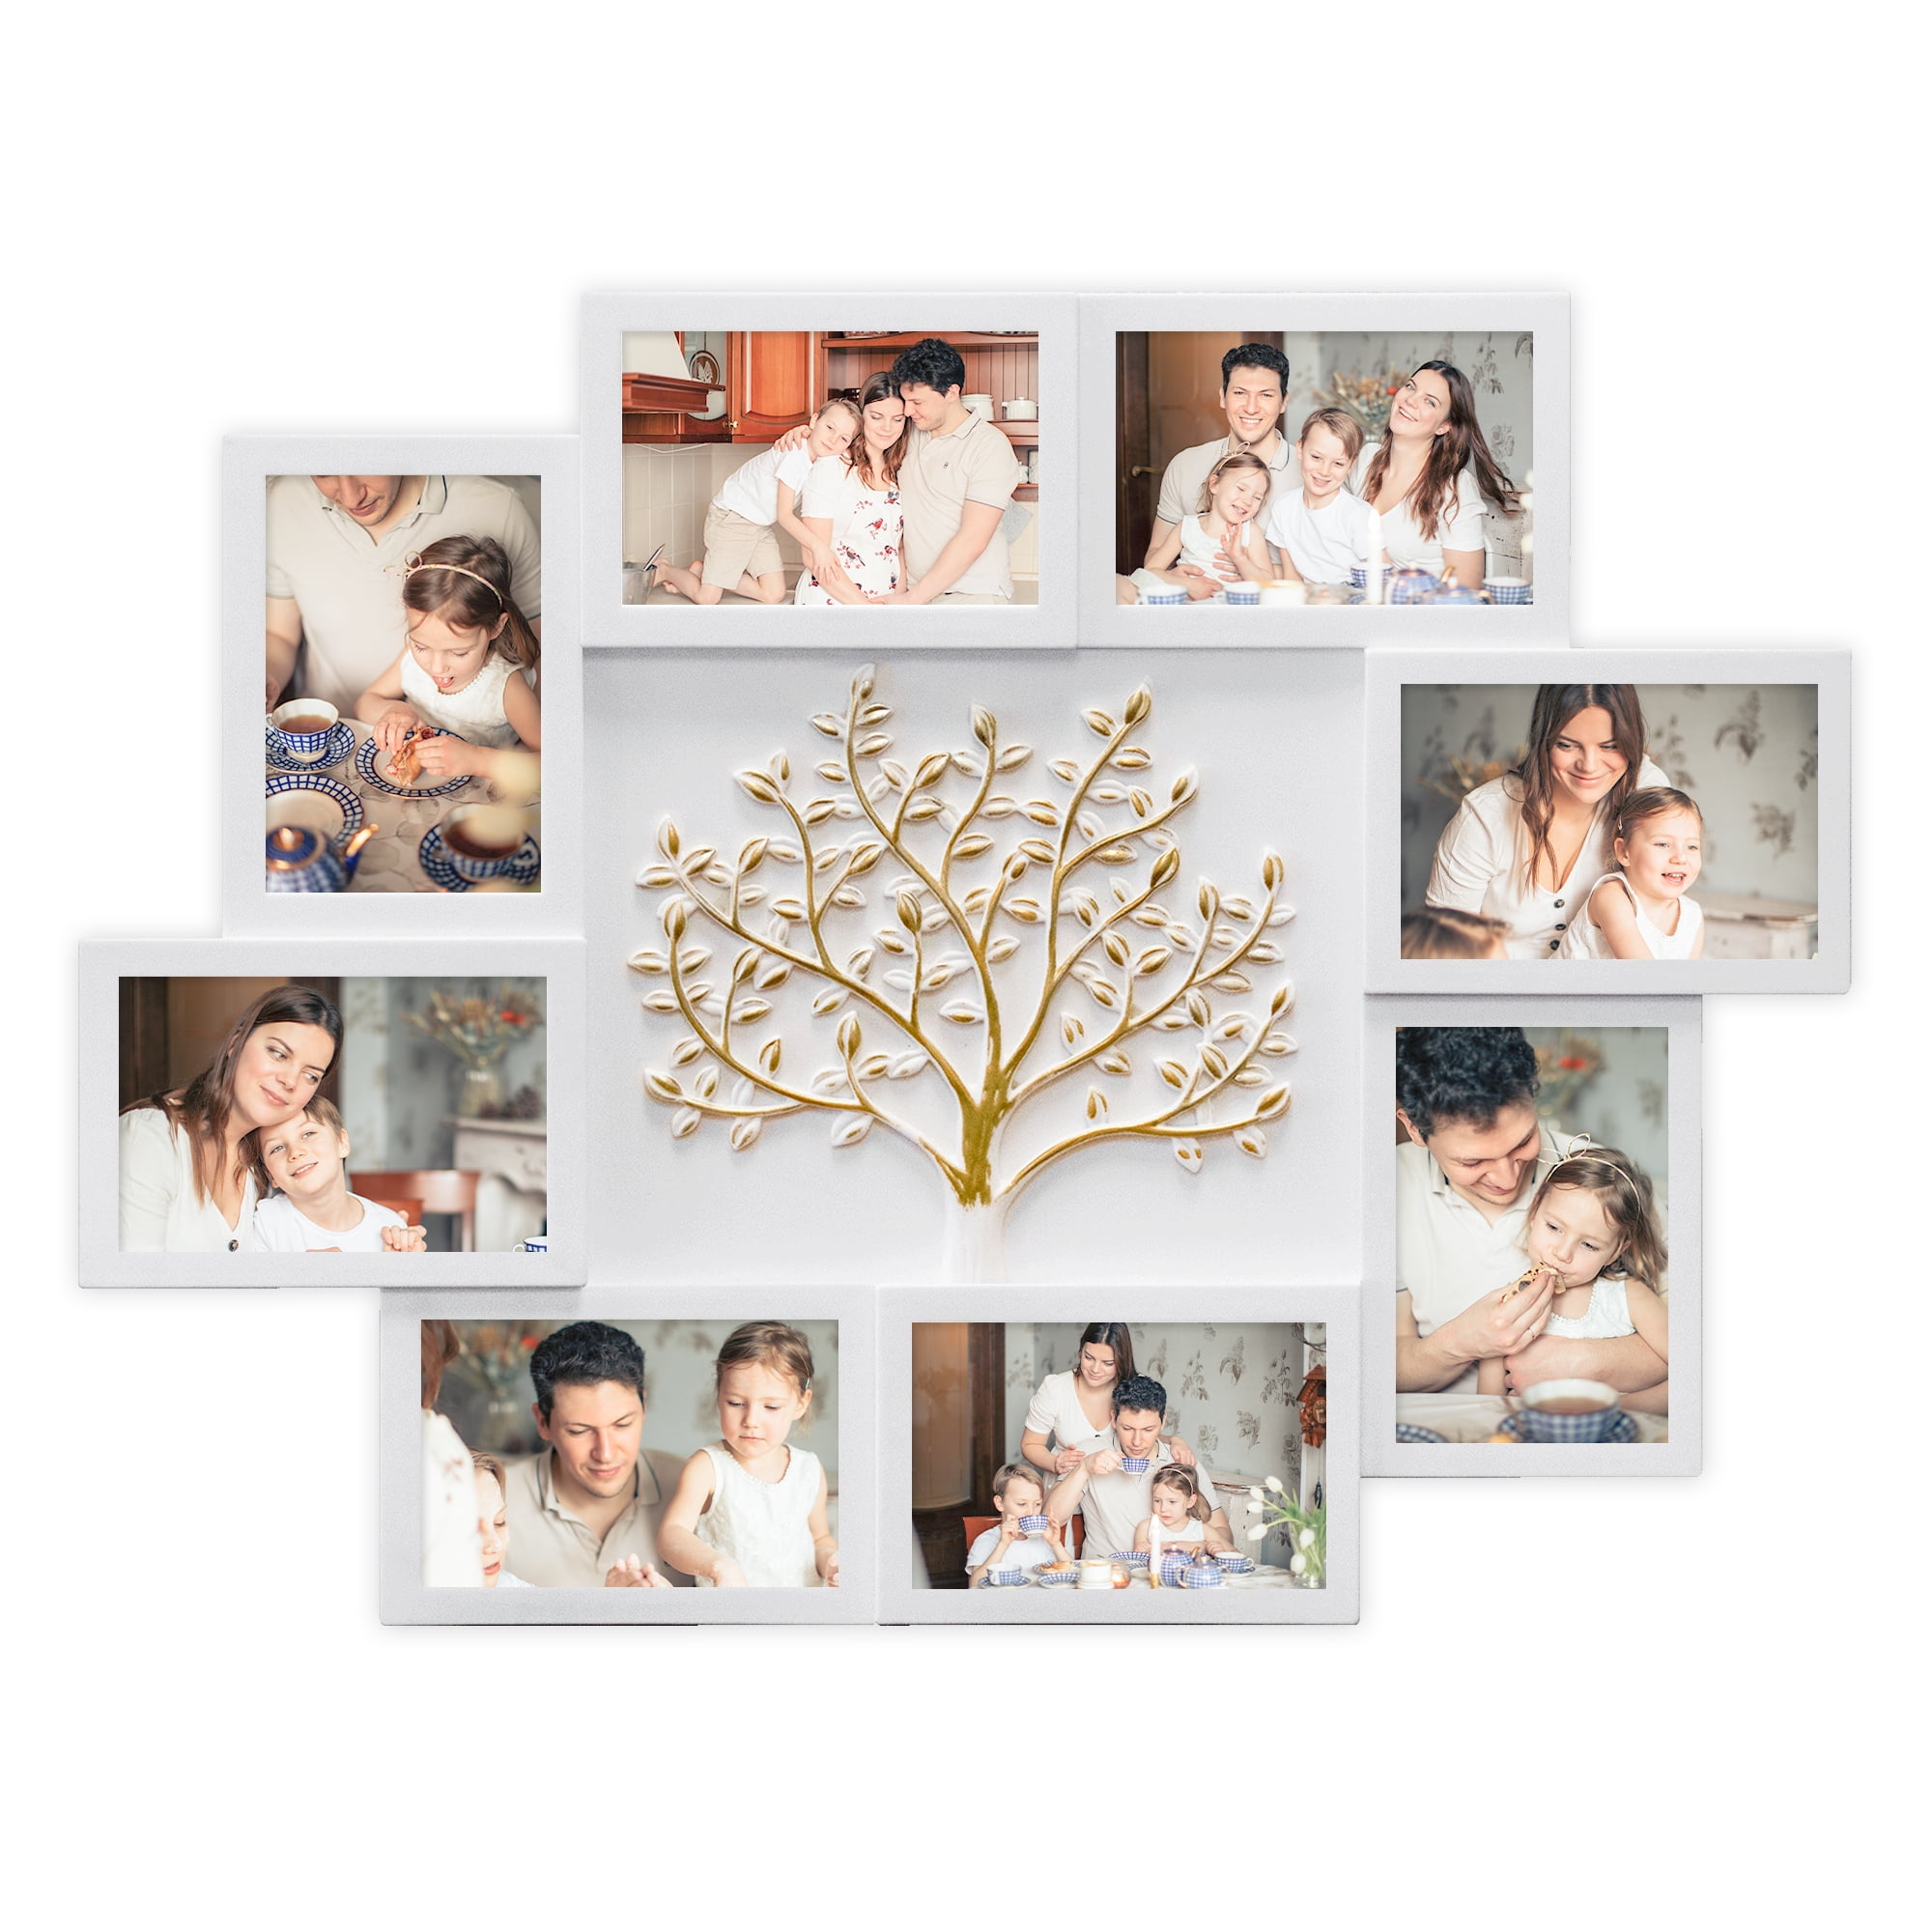 Edge Multi-Photo Wall Display – Great Collage Photo Frame for Family  Photos, Holiday Pictures and Prints - Aged Walnut – Chensi